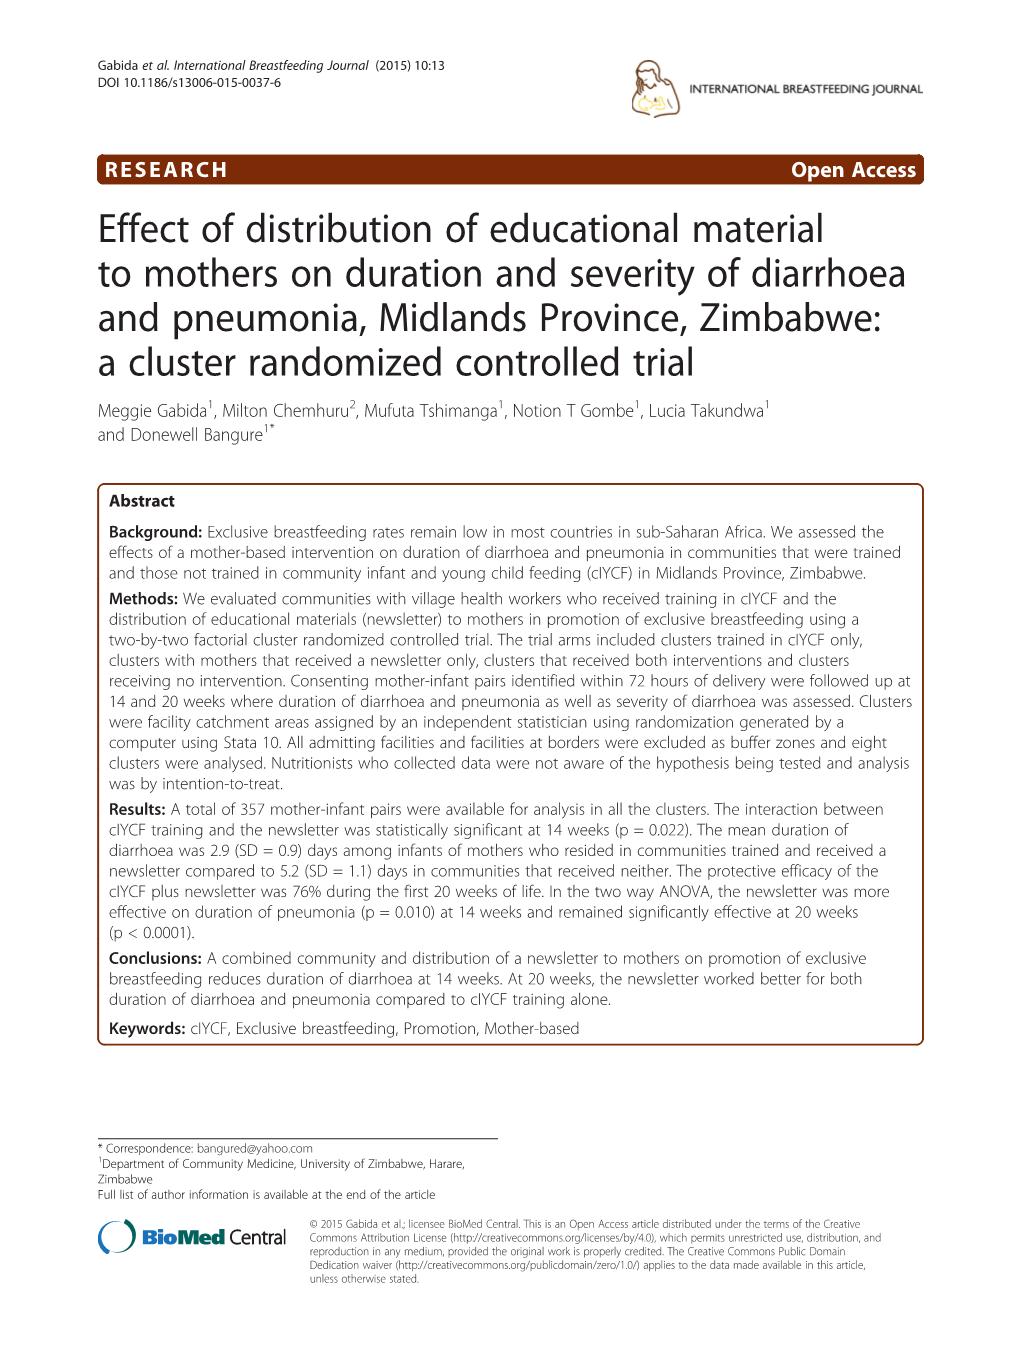 Effect of Distribution of Educational Material to Mothers on Duration And